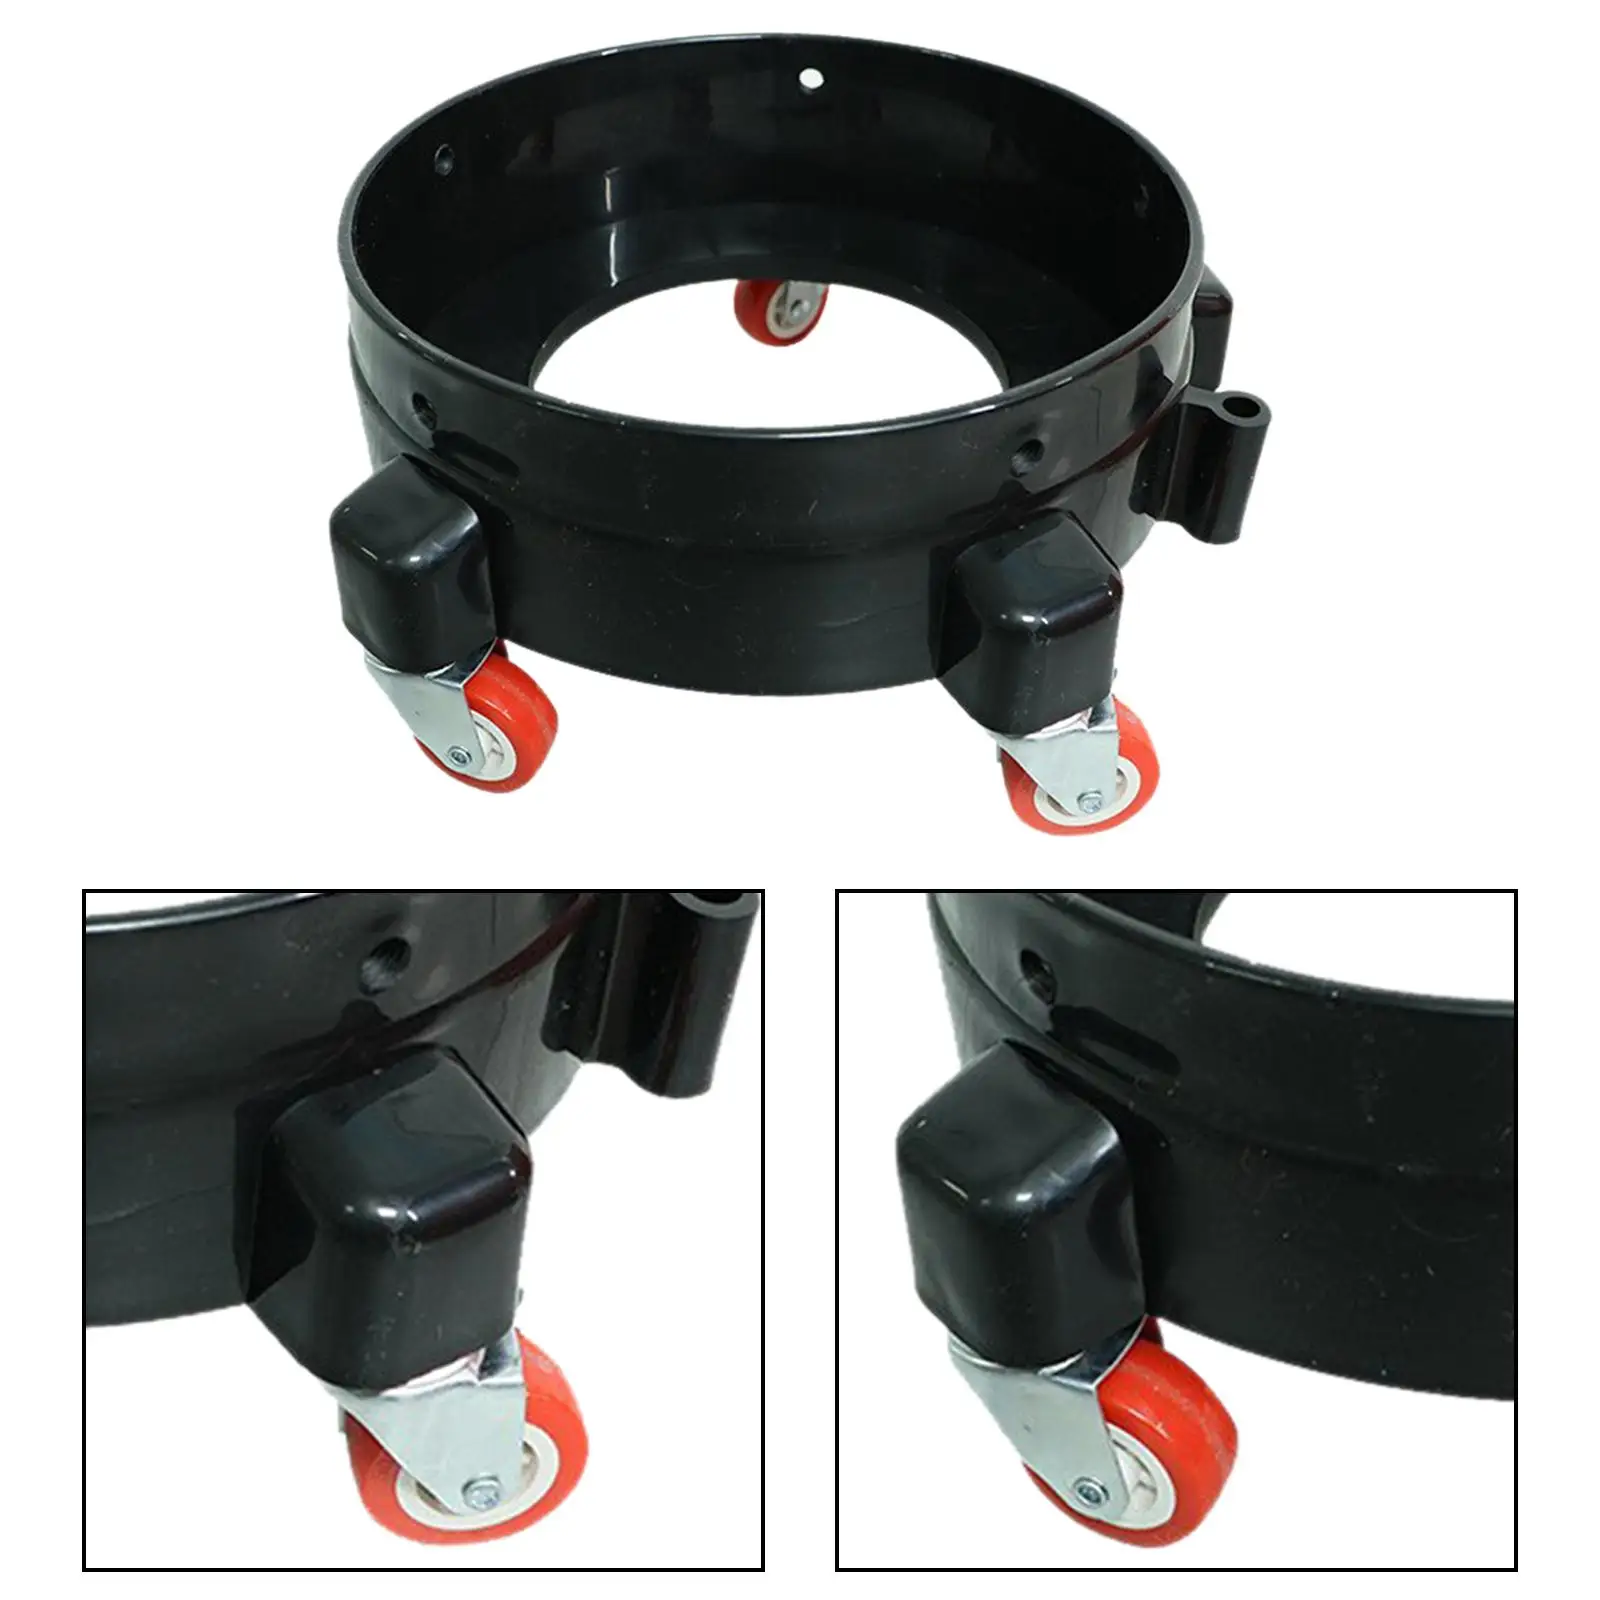 Swivel Casters Easy to Push Painting Vehicle Cars Wash Rolling Bucket Dolly